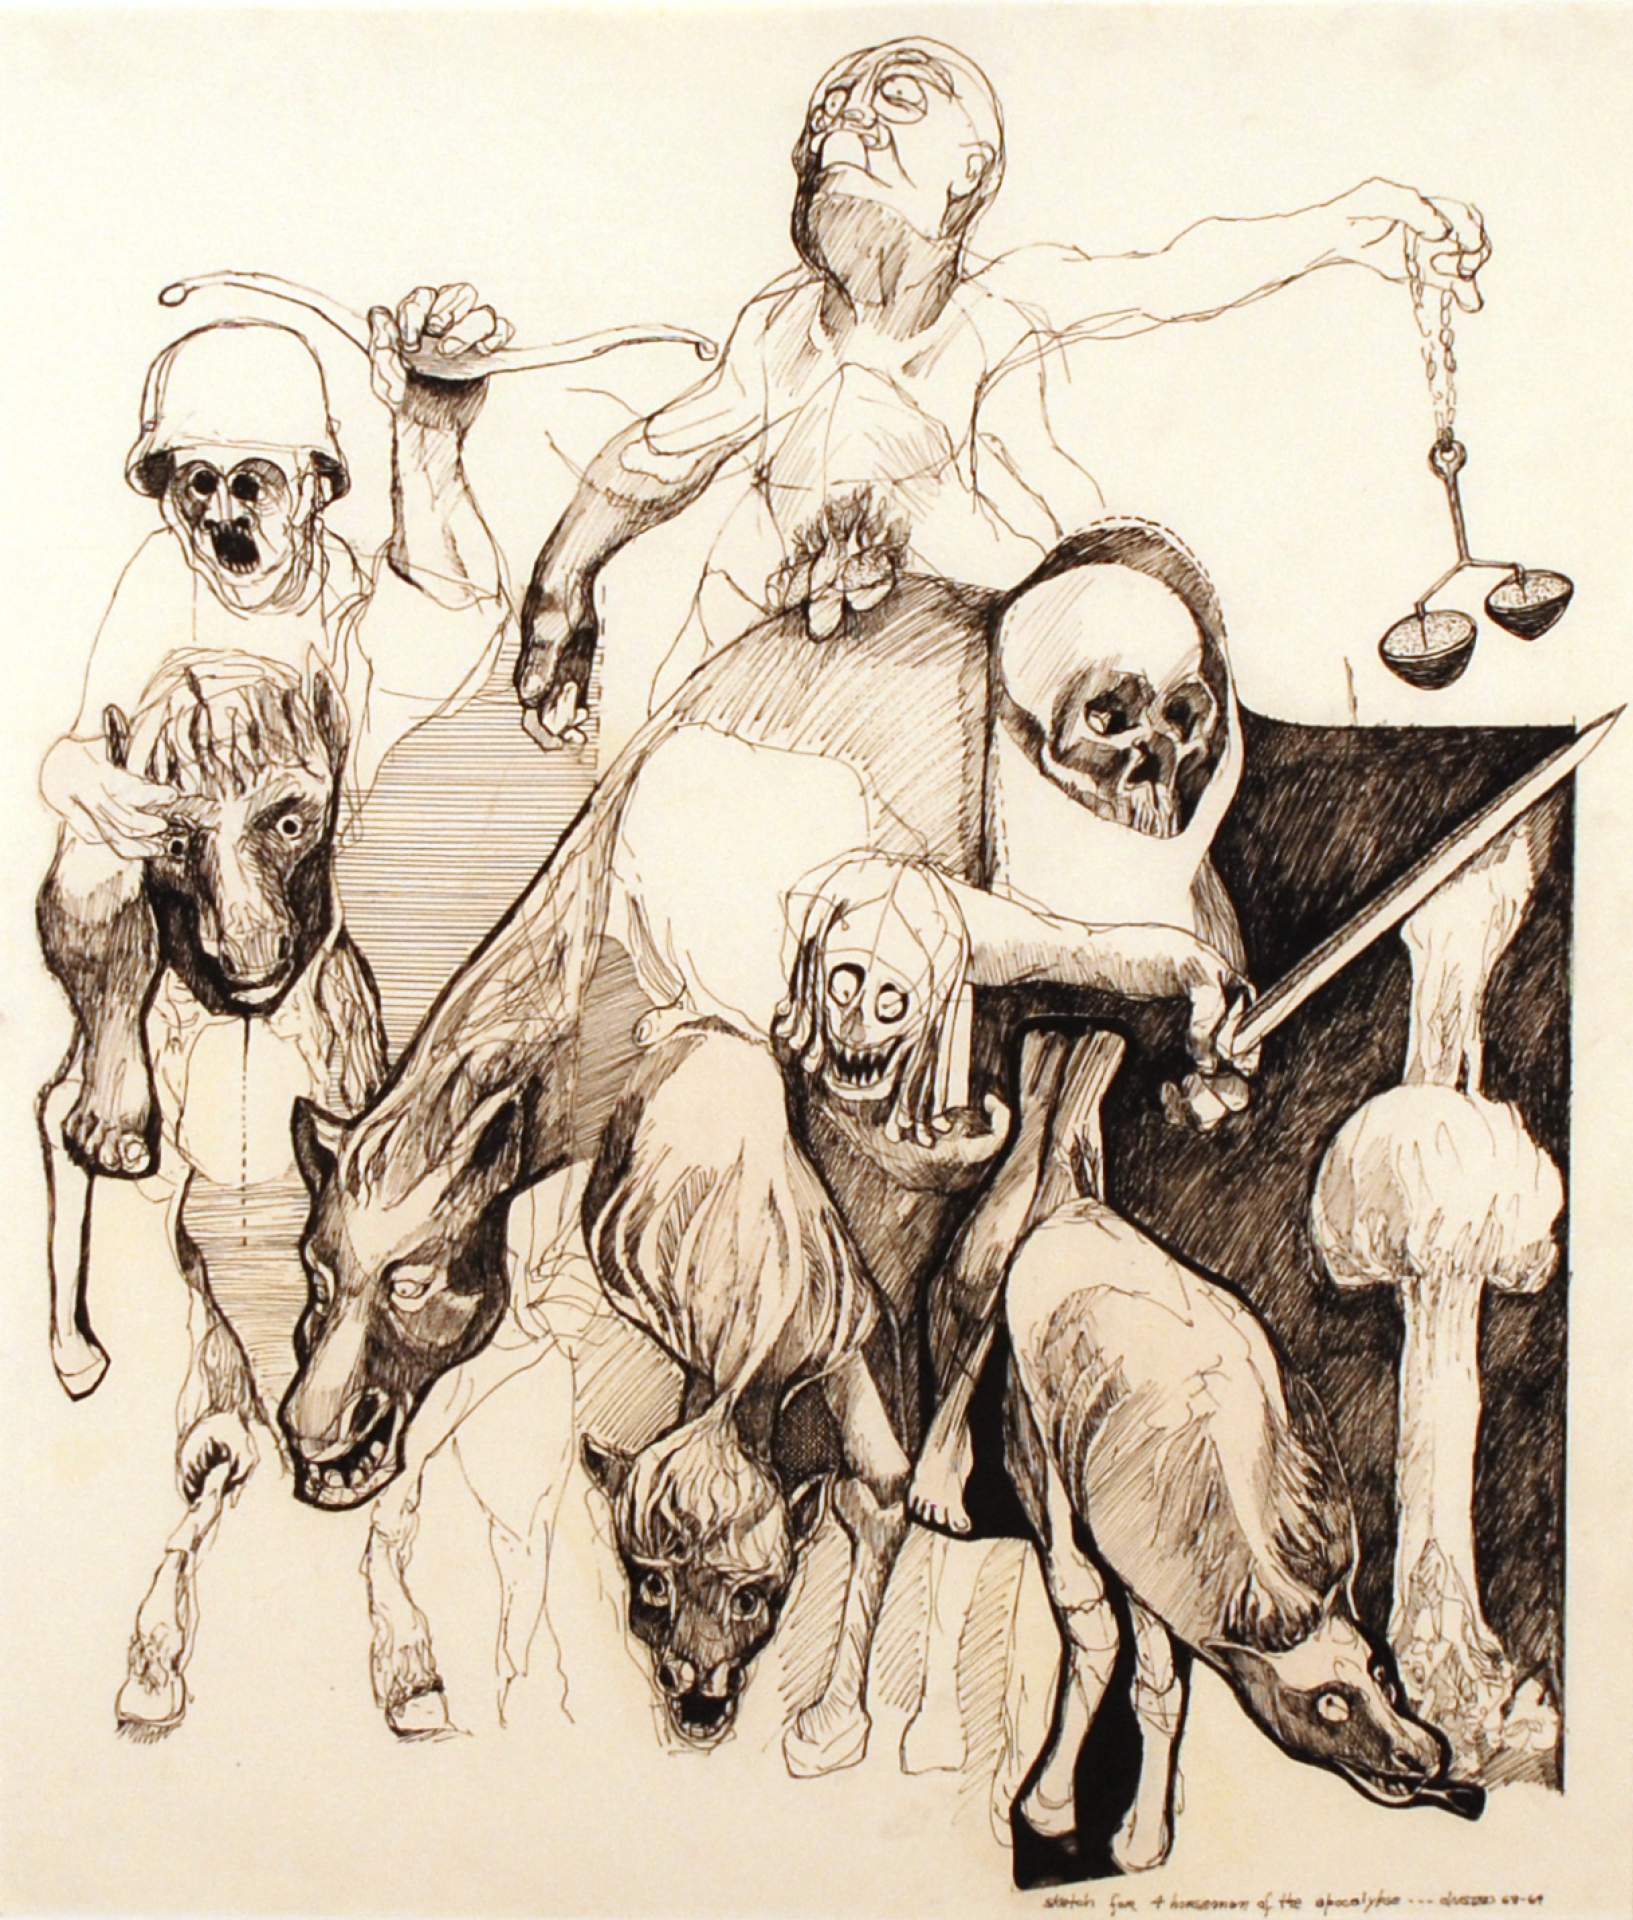 Sketch for the Four Horsemen of the Apocalypse